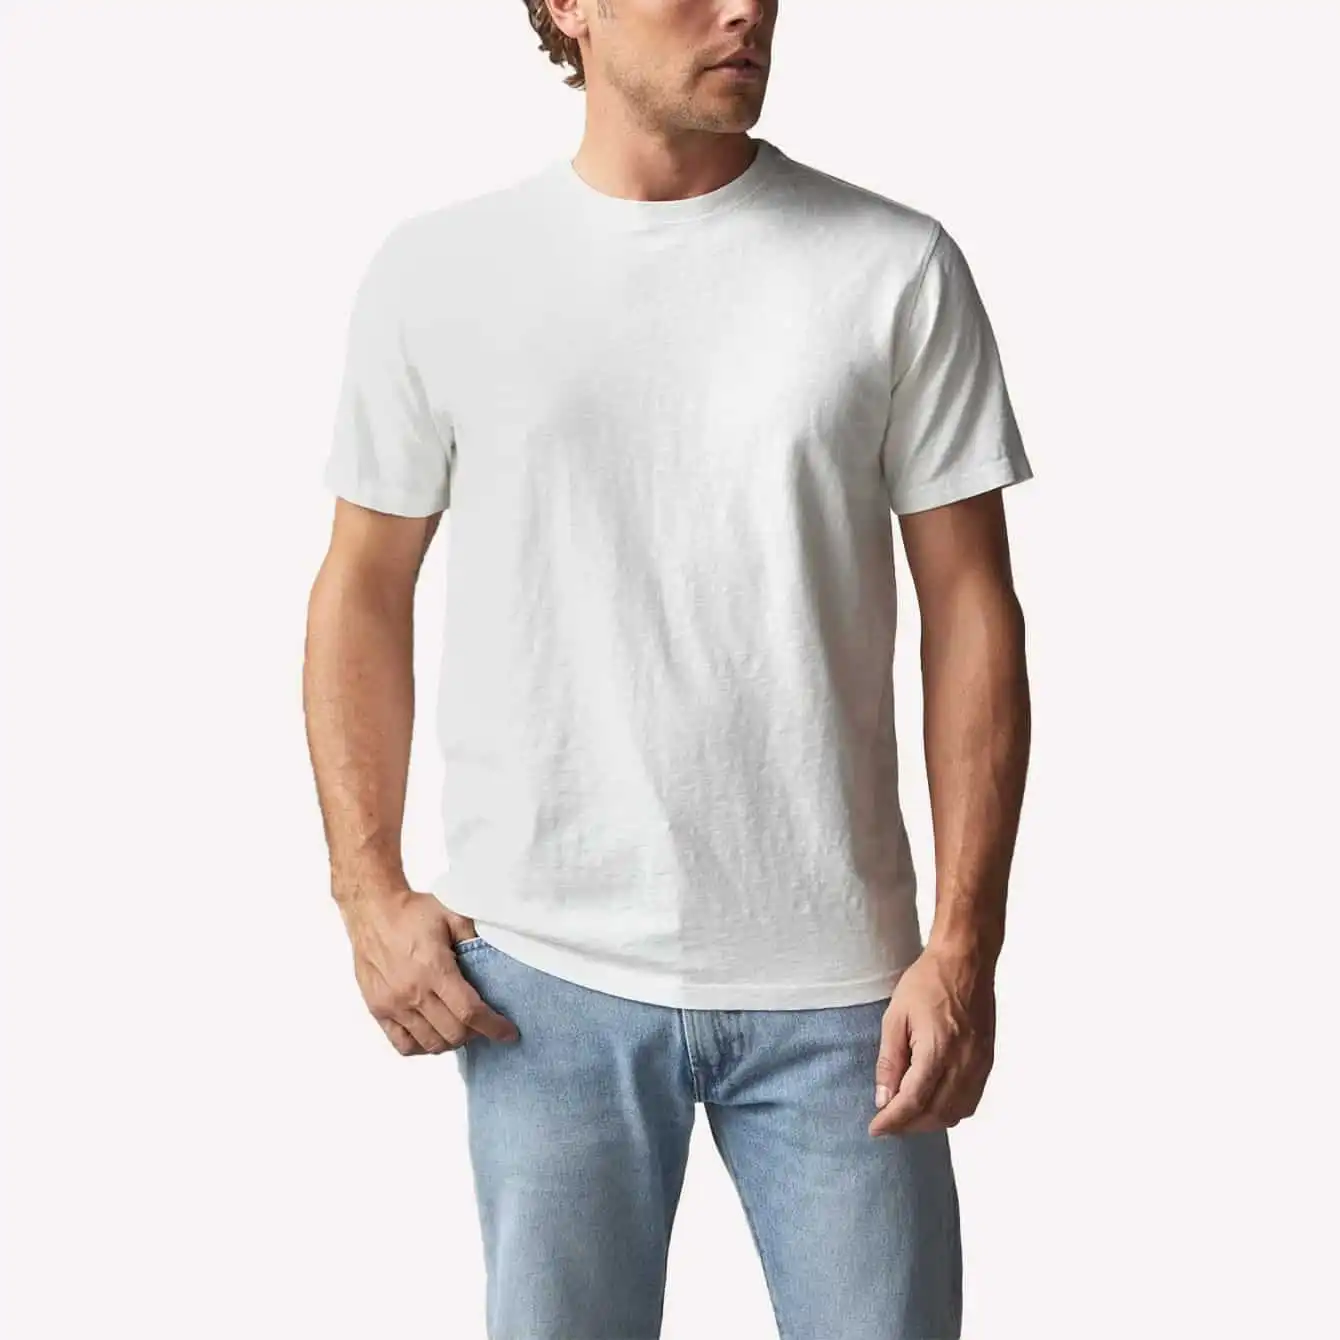 The Best White T-Shirts for Men - The Modest Man